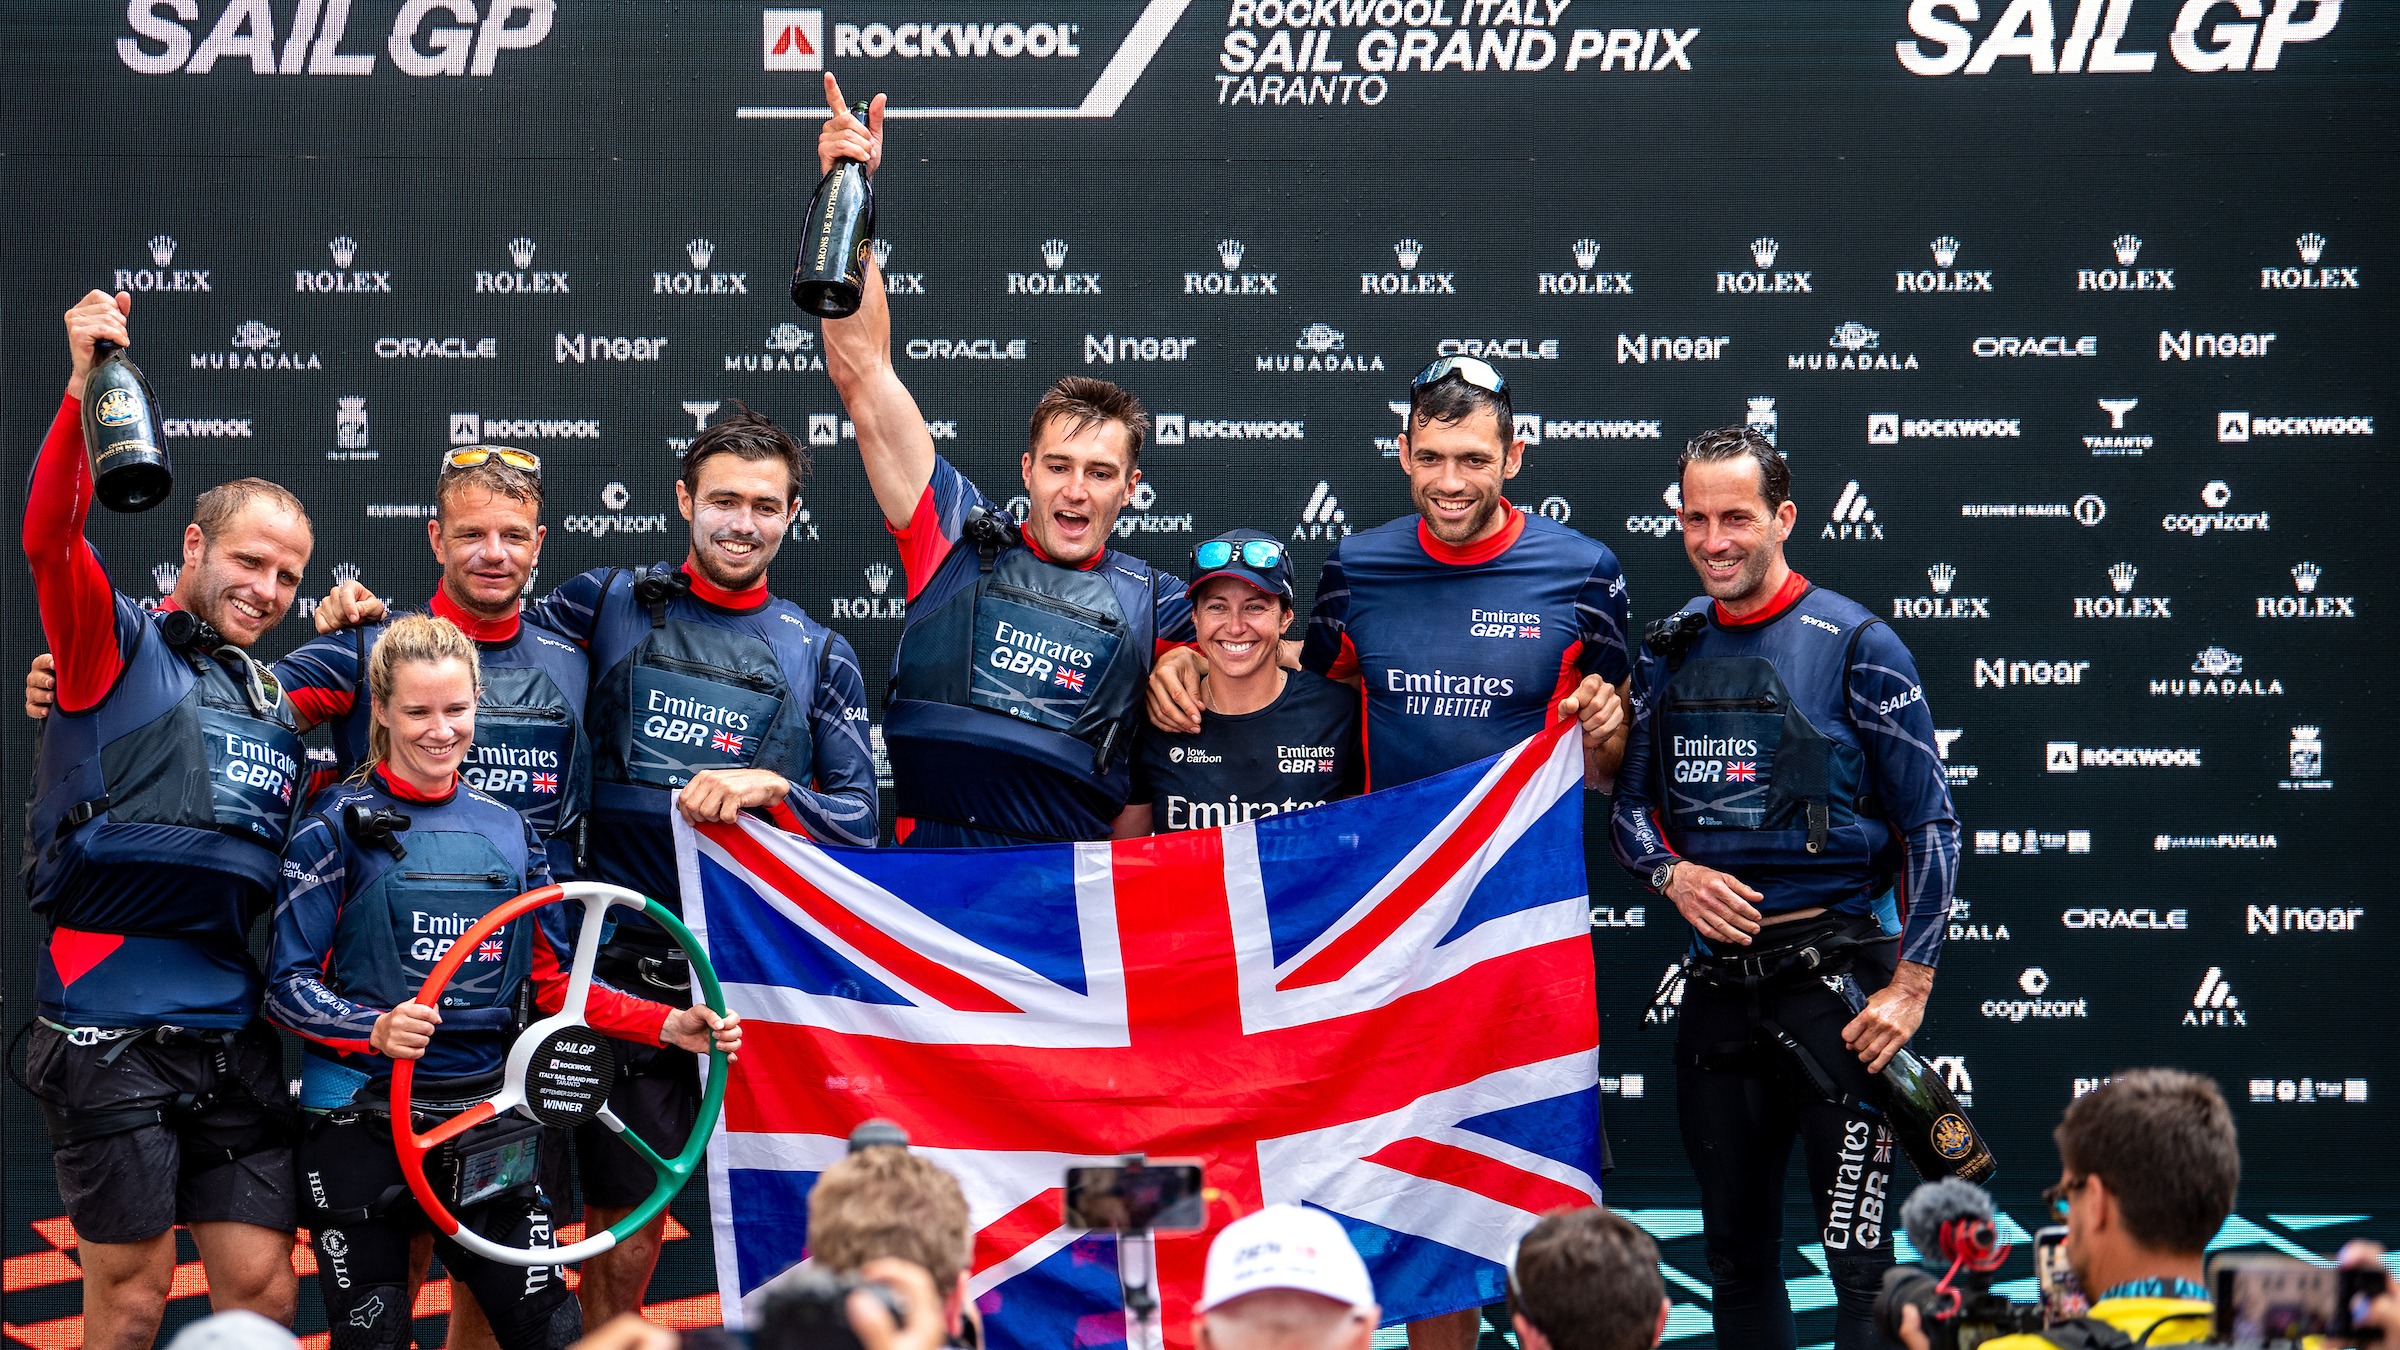 Season 4 // Emirates GBR crew celebrate with Union Flag after racing in Taranto